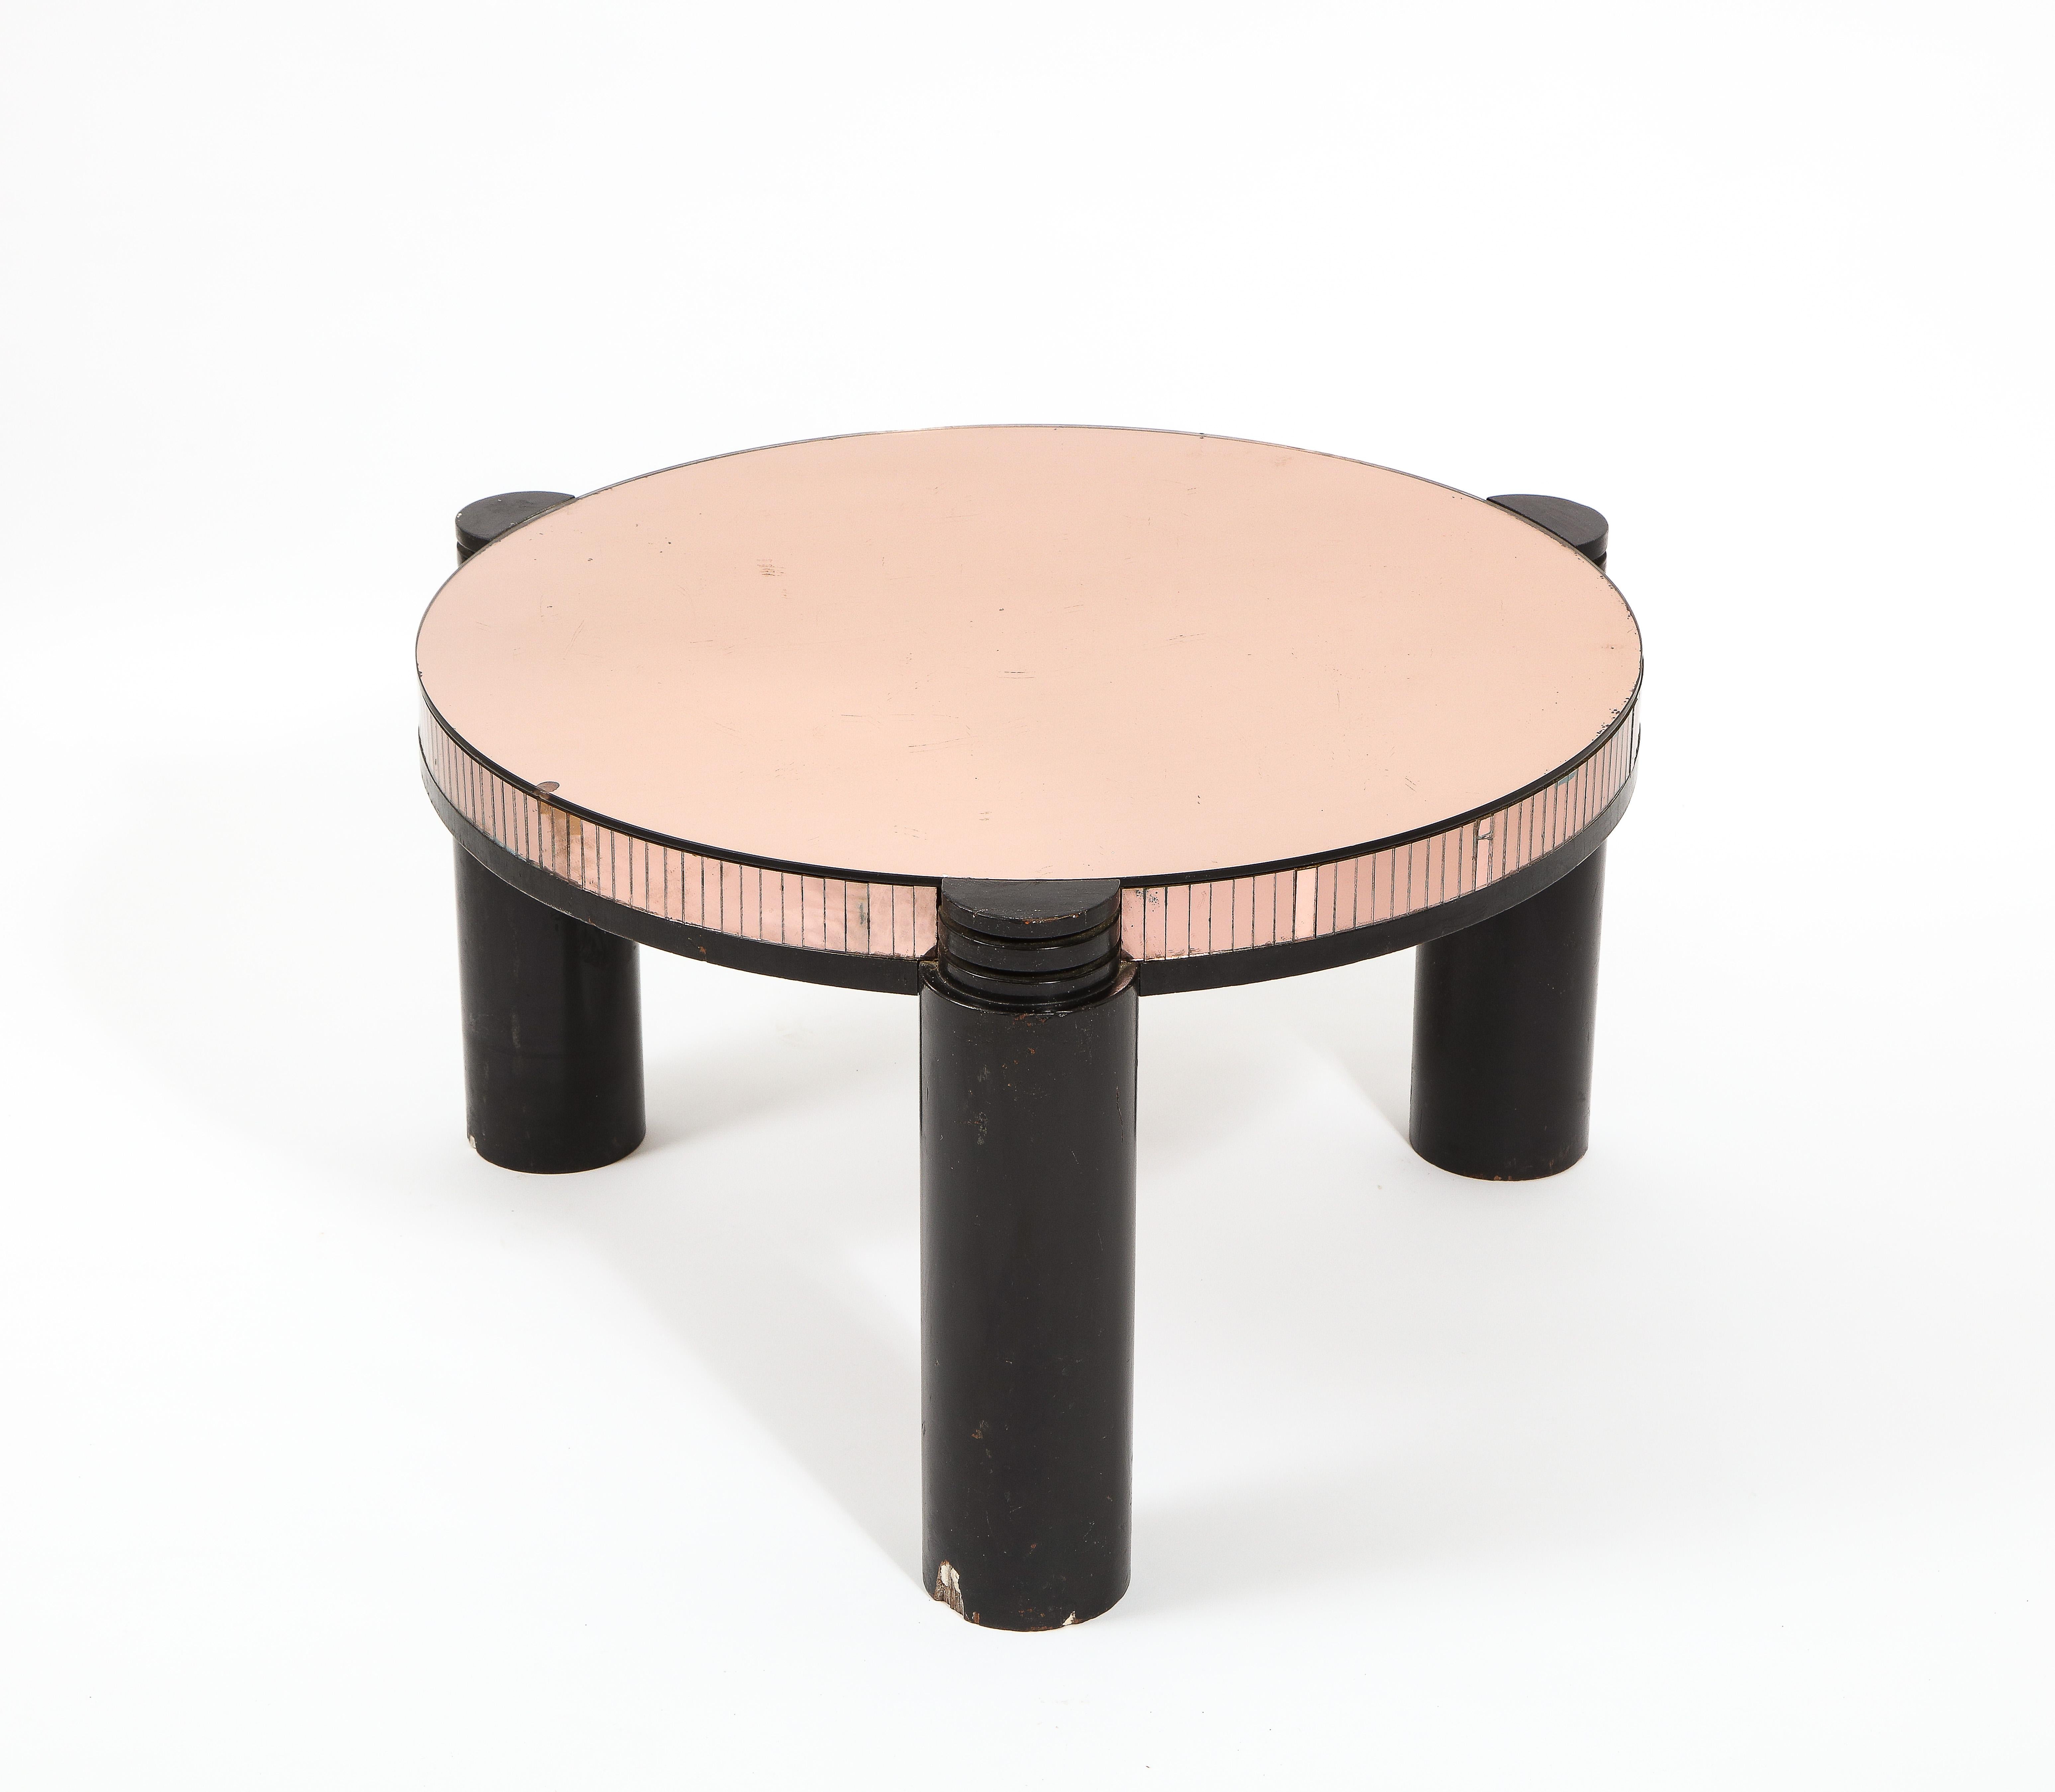 Black Ebonized & Pink Mirror Round Deco Style Cocktail Table, France 1940's For Sale 3